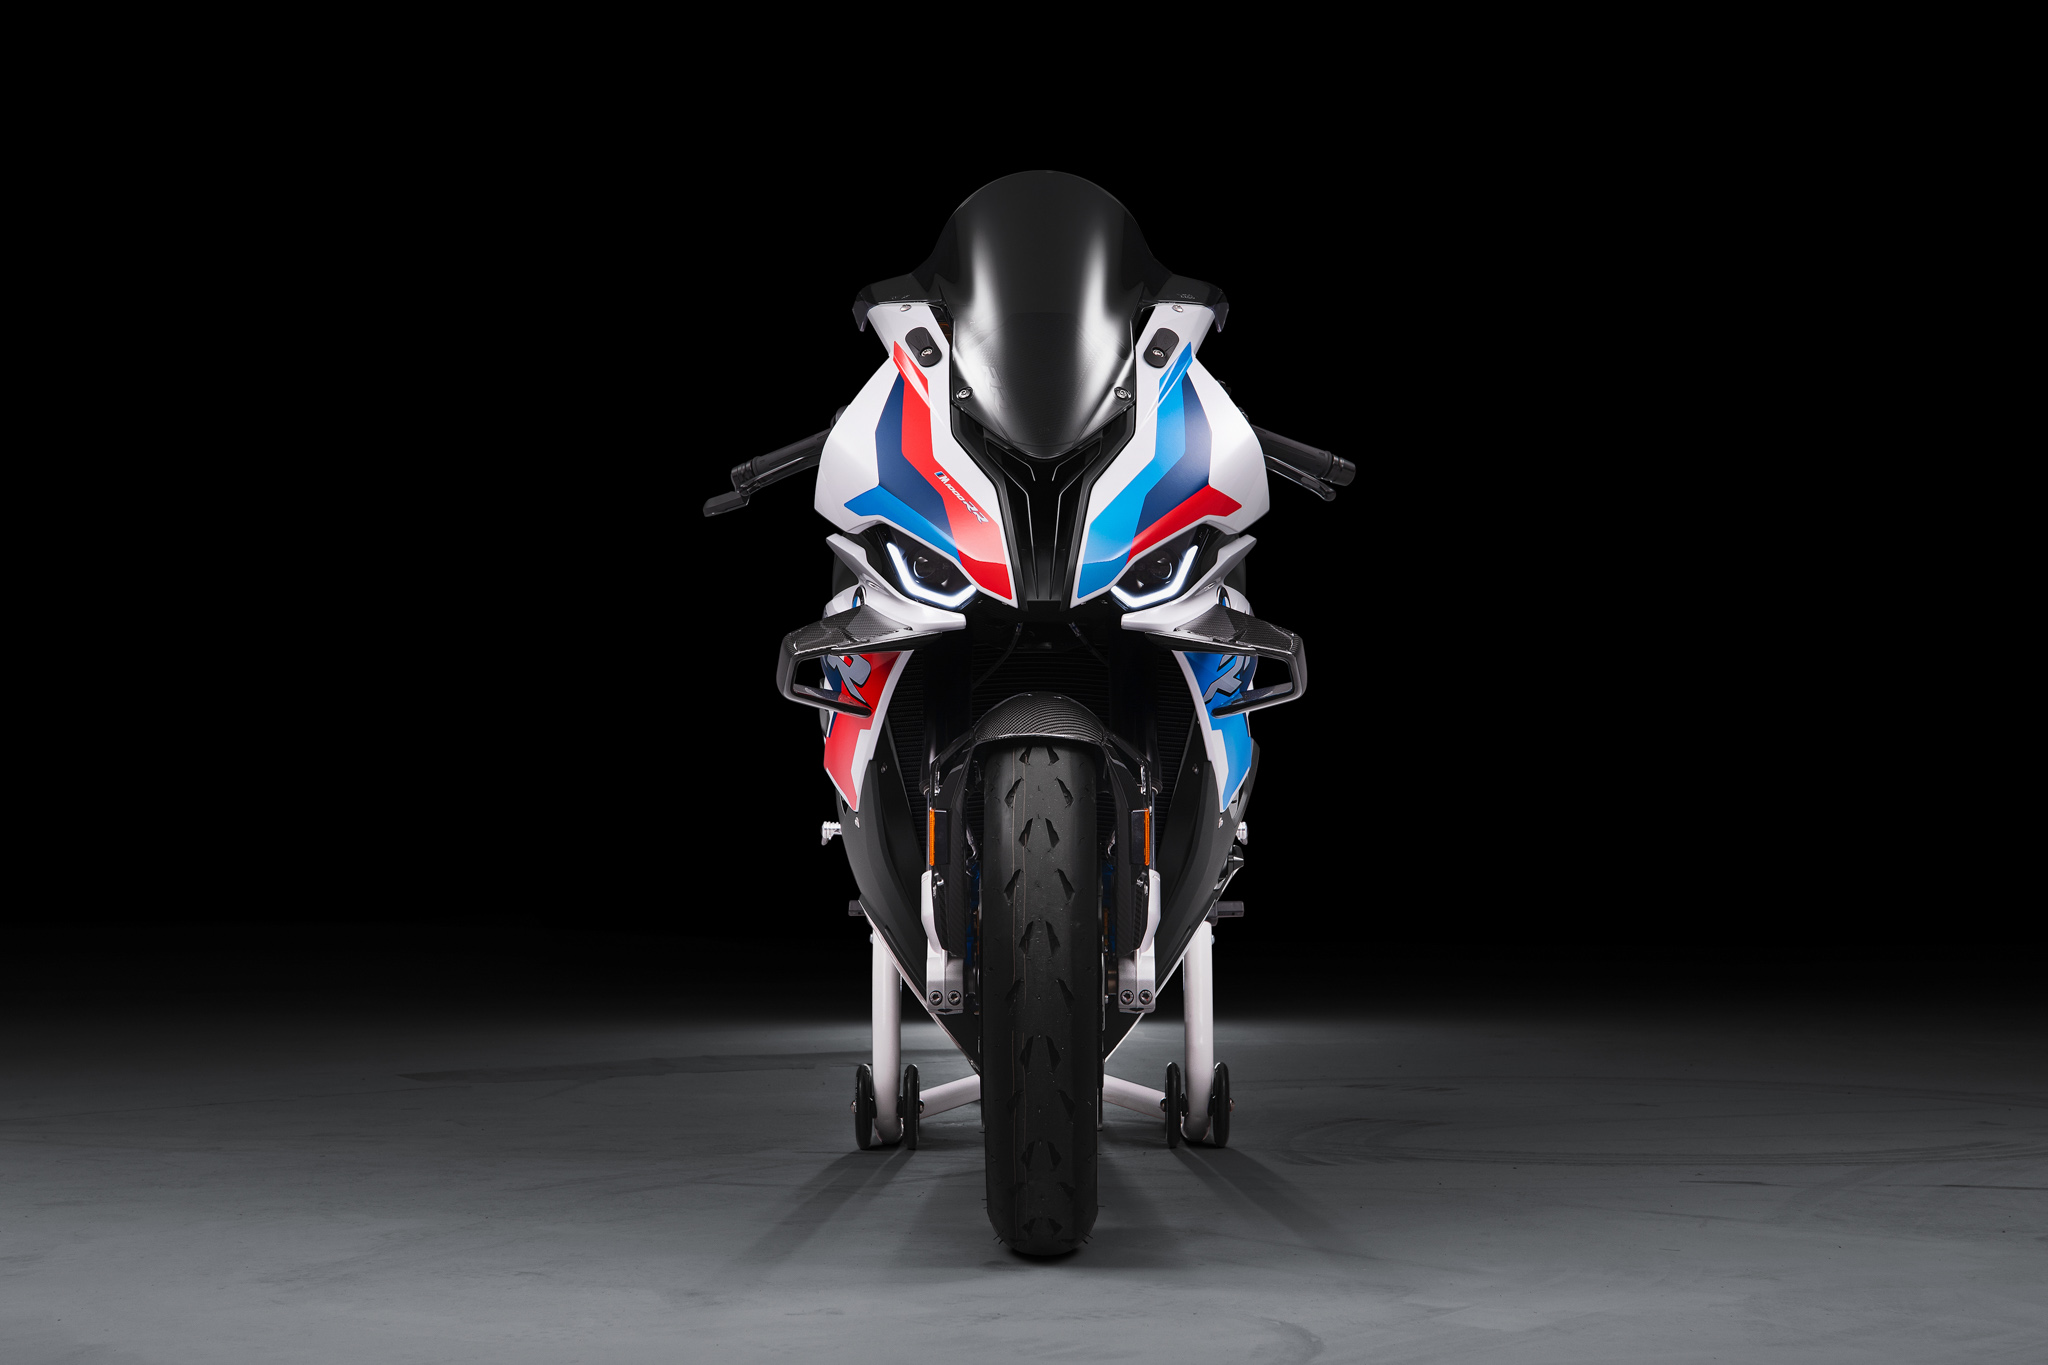 Download wallpaper 1350x2400 bmw s1000 rr bmw motorcycle bike black  moto iphone 876s6 for parallax hd background